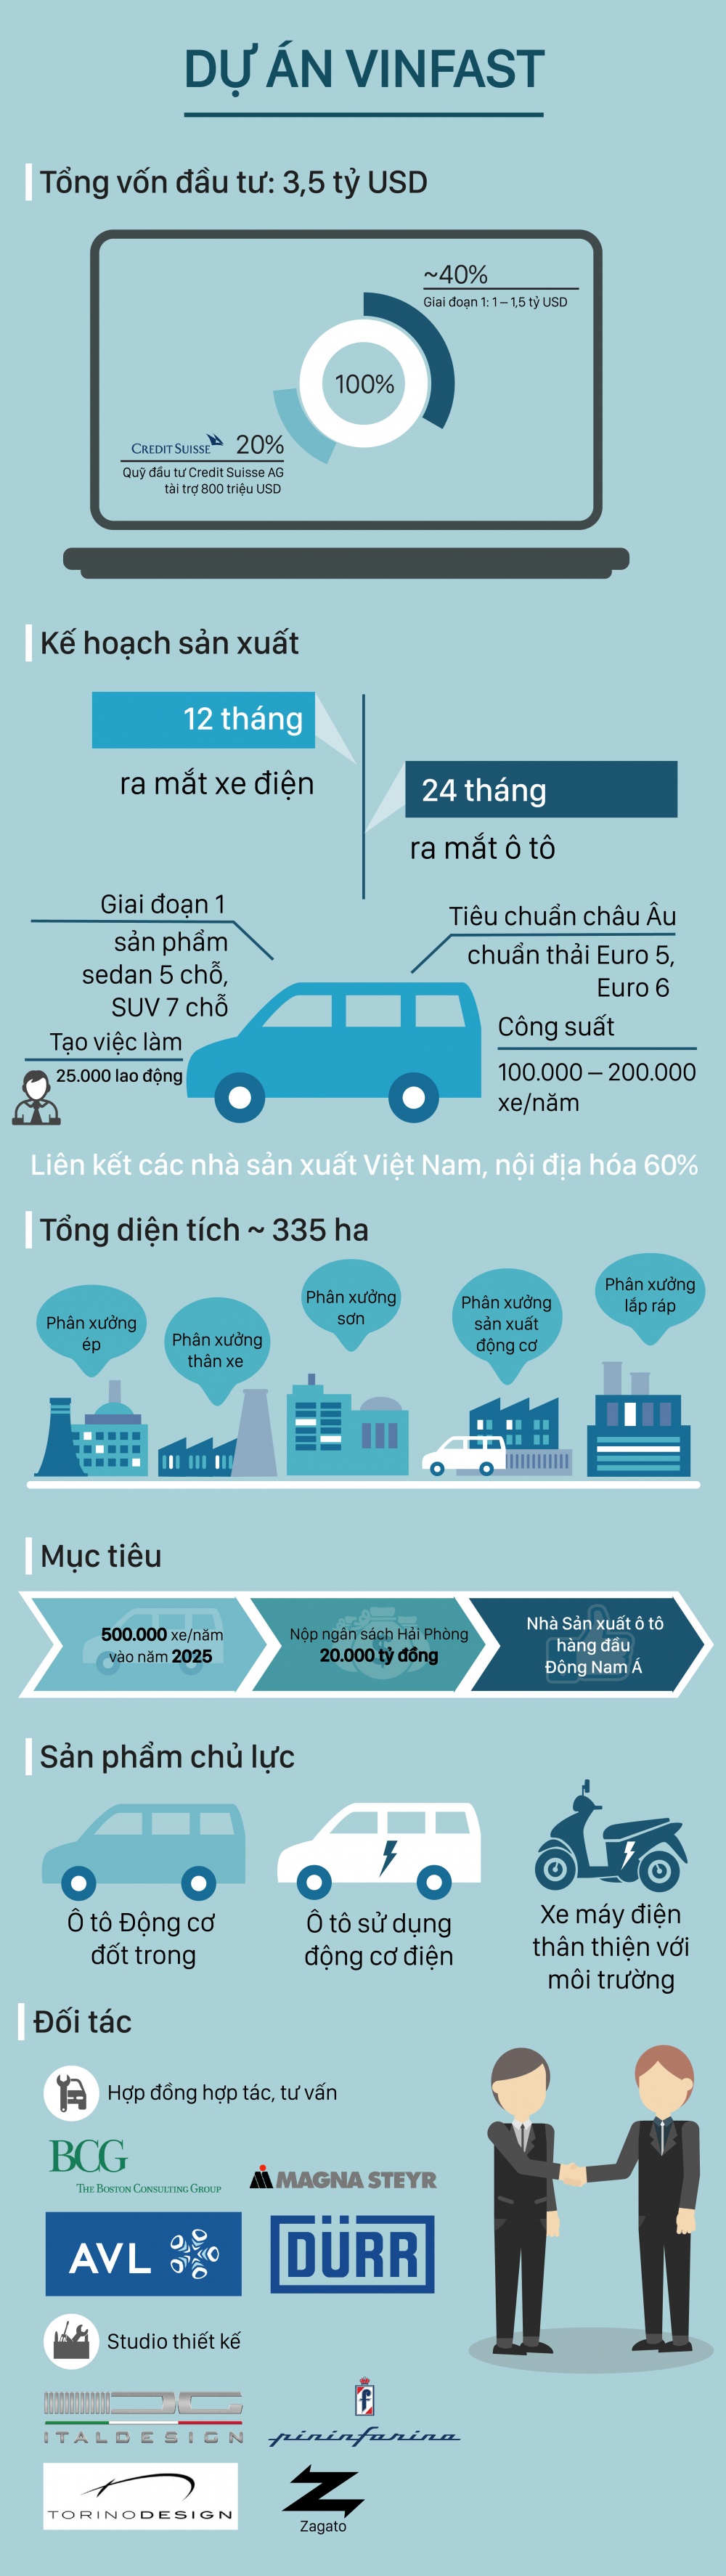 infographics du an nha may o to vinfast khung co nao